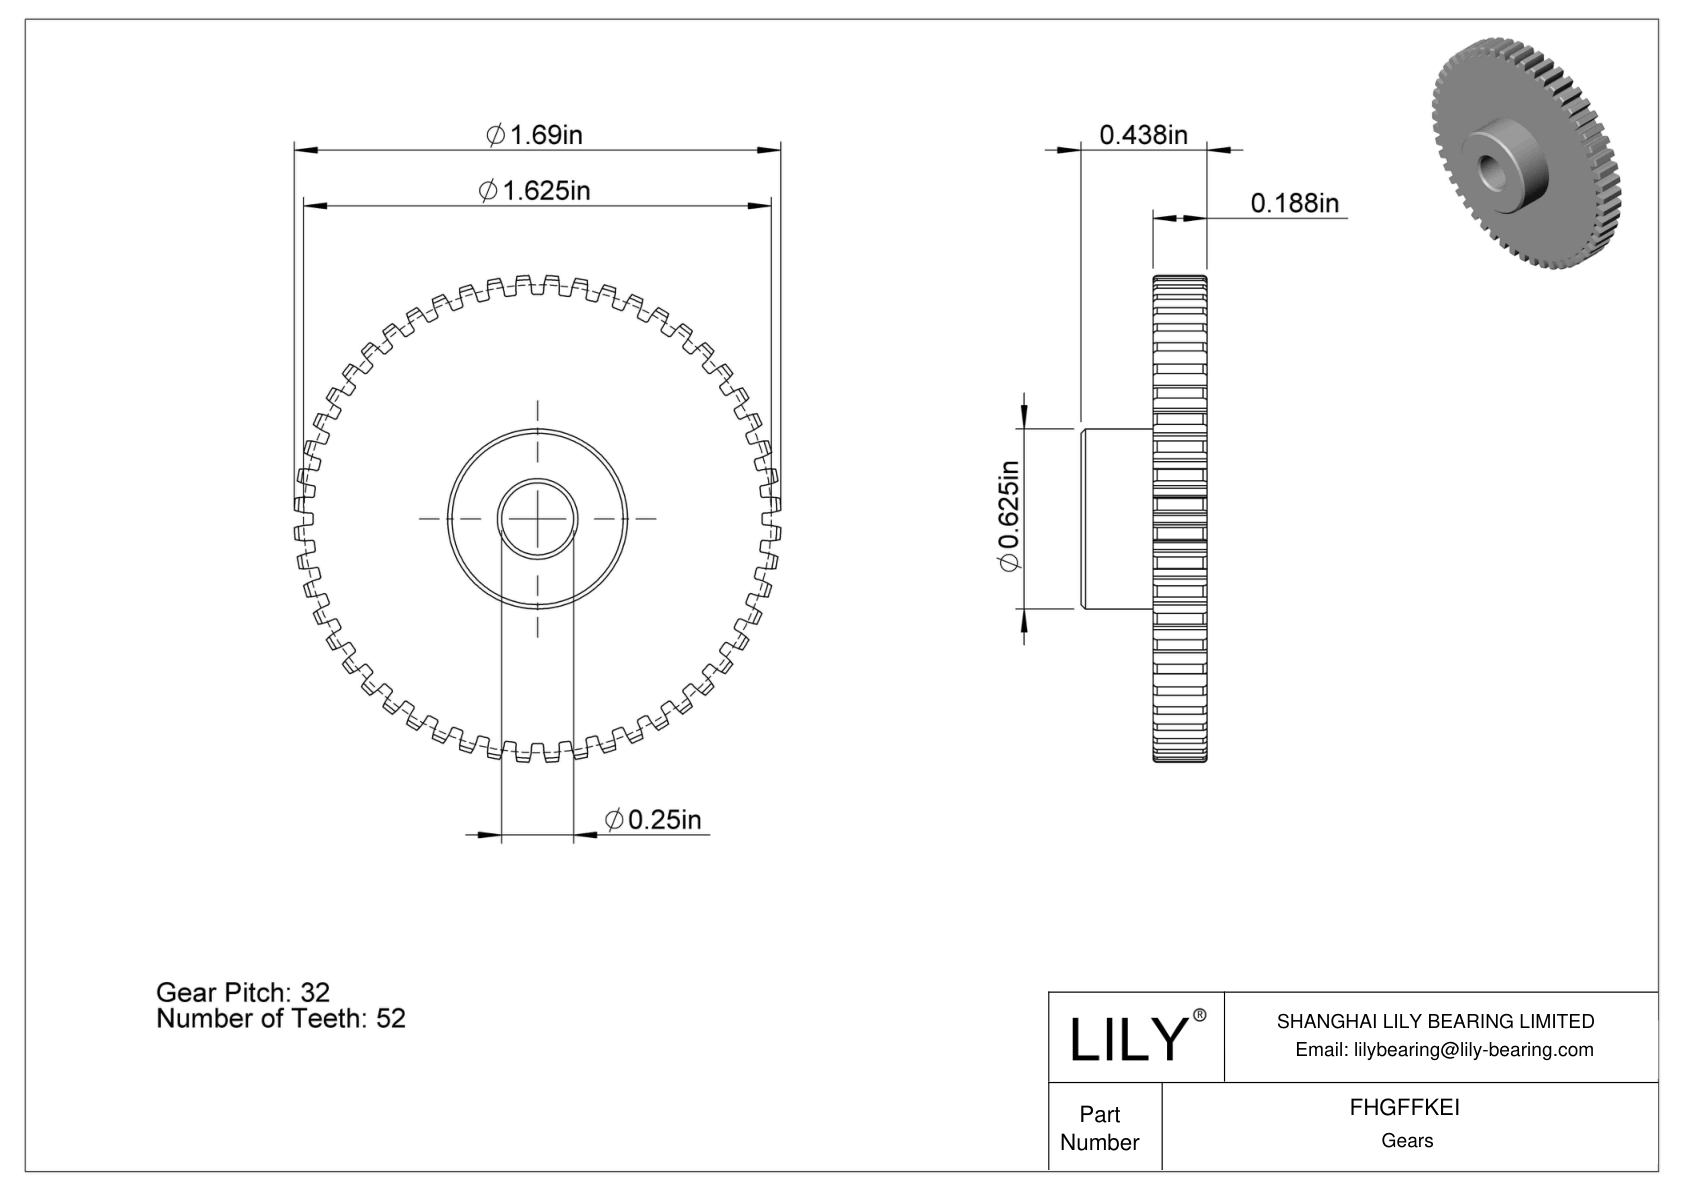 FHGFFKEI Plastic Gears - 14 1/2° Pressure Angle cad drawing